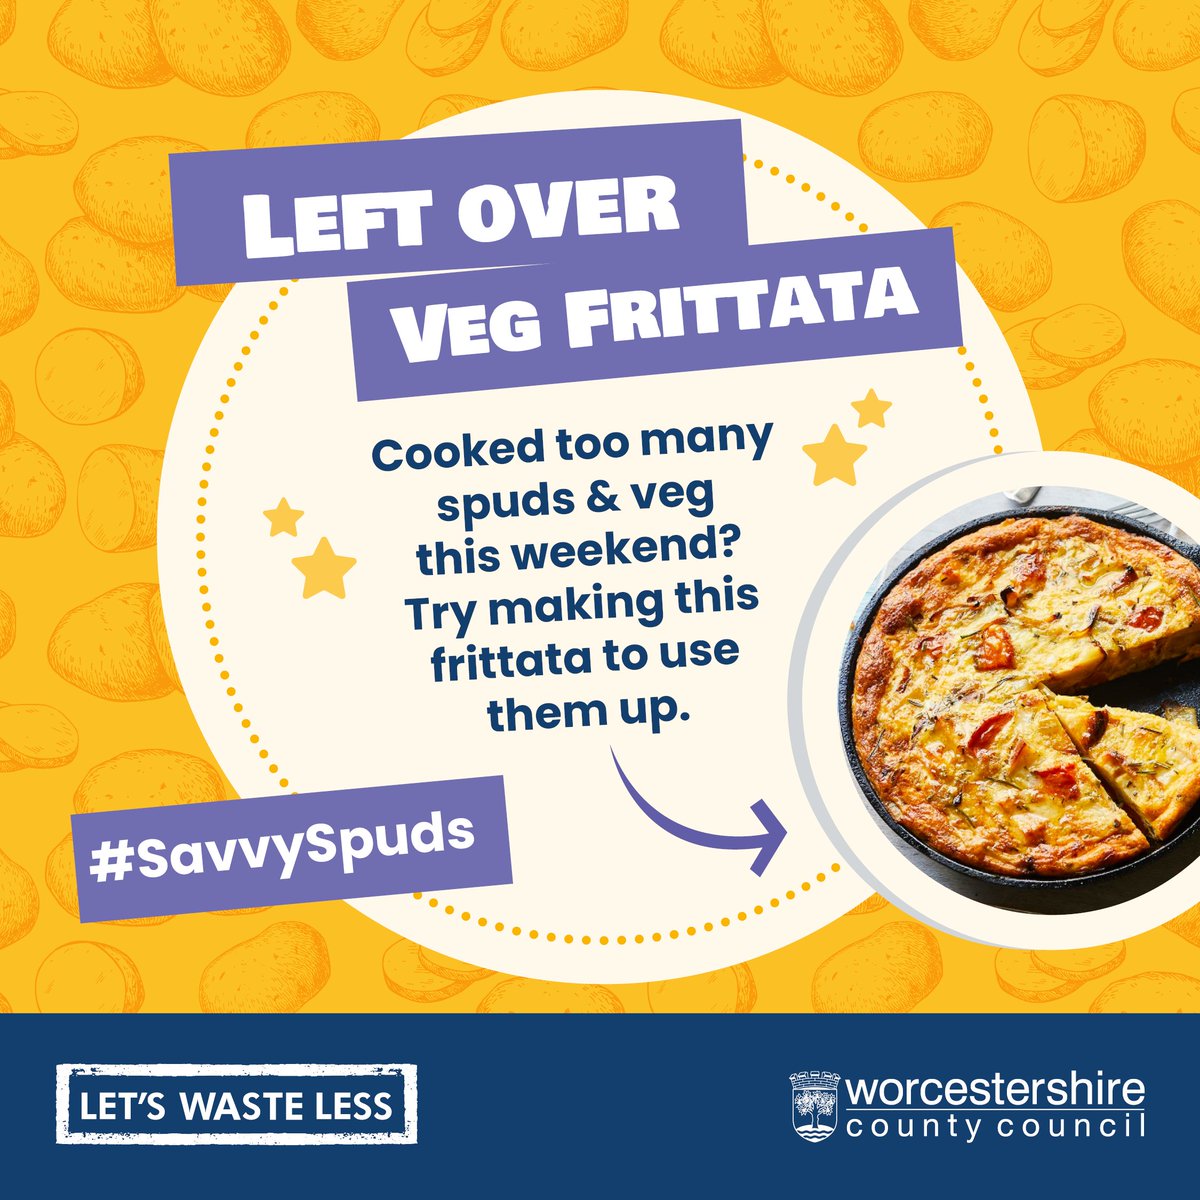 🥔🥕 Don't let those leftover spuds and veggies go to waste! Turn them into a delicious roasted veg frittata for Sunday supper 🍳 Visit bit.ly/3N7Sa6o for the recipe ! #SavvySpuds #FoodSavvyWorcestershire #letswasteless #NoFoodWaste #SundaySupper 🌱🍽️